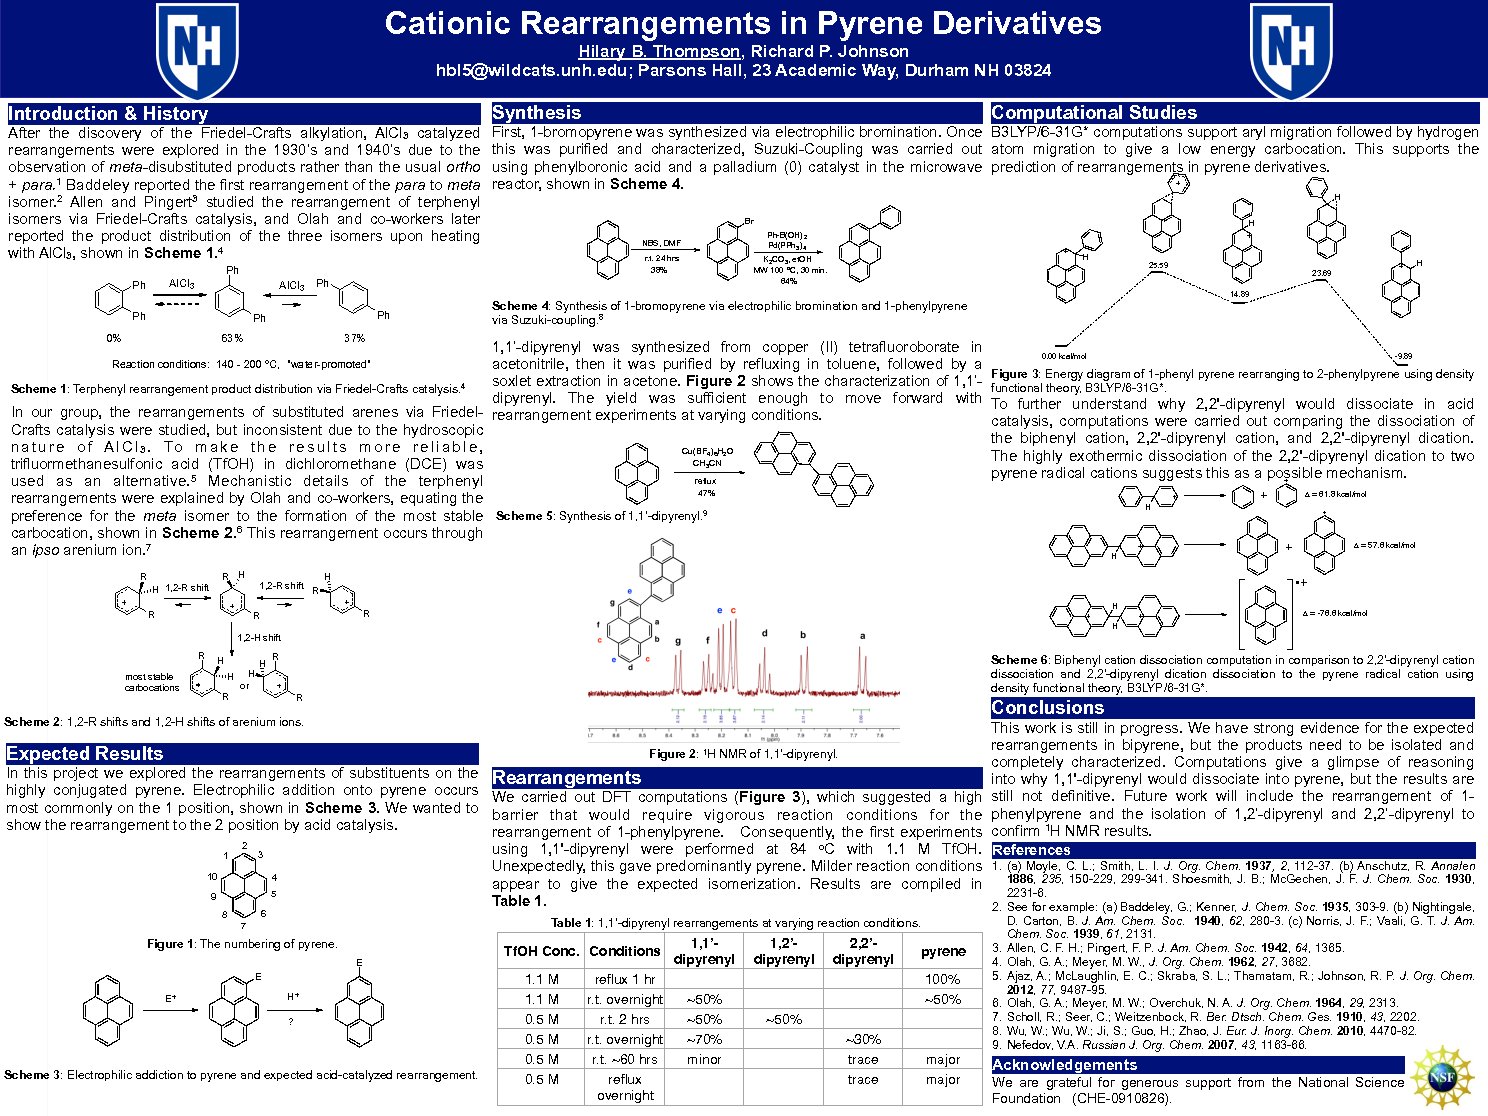 Cationic Rearrangements In Pyrene Derivatives by hbl5